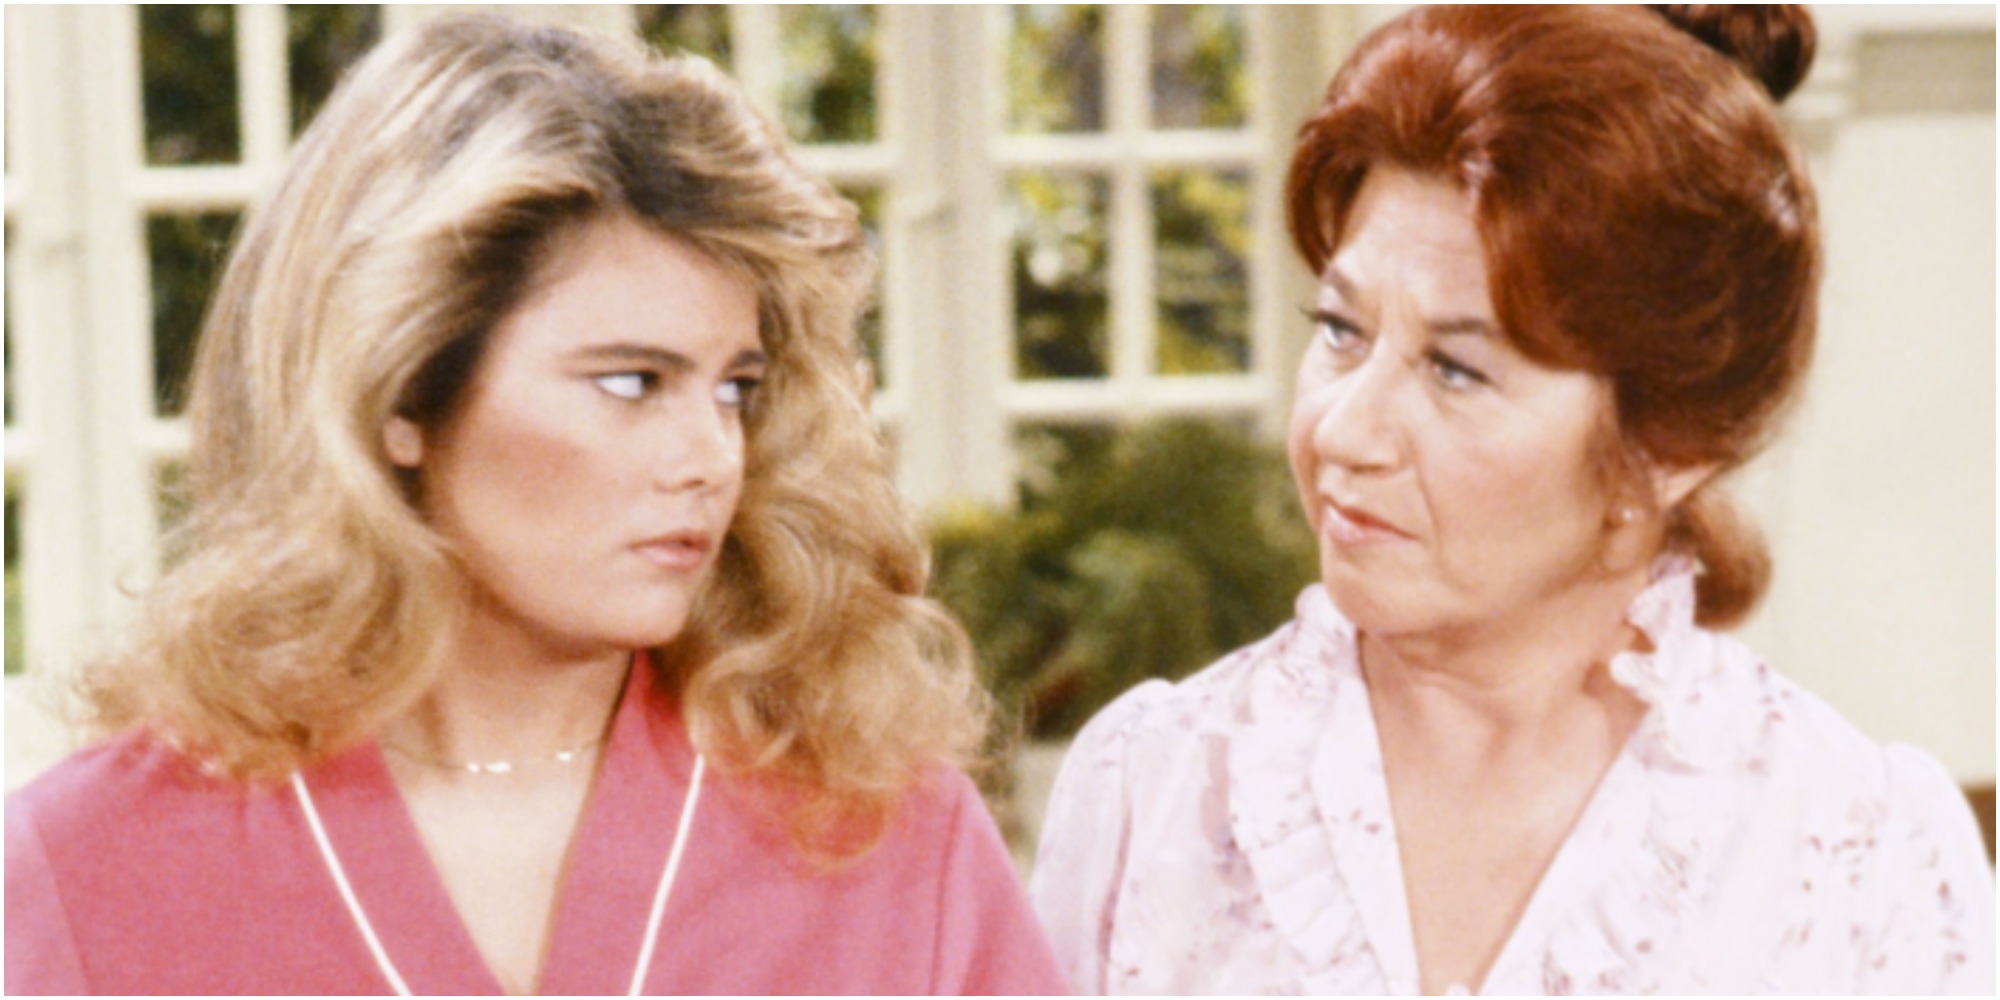 Lisa Welchel and Charlotte Rae on the set of The Facts of Life.